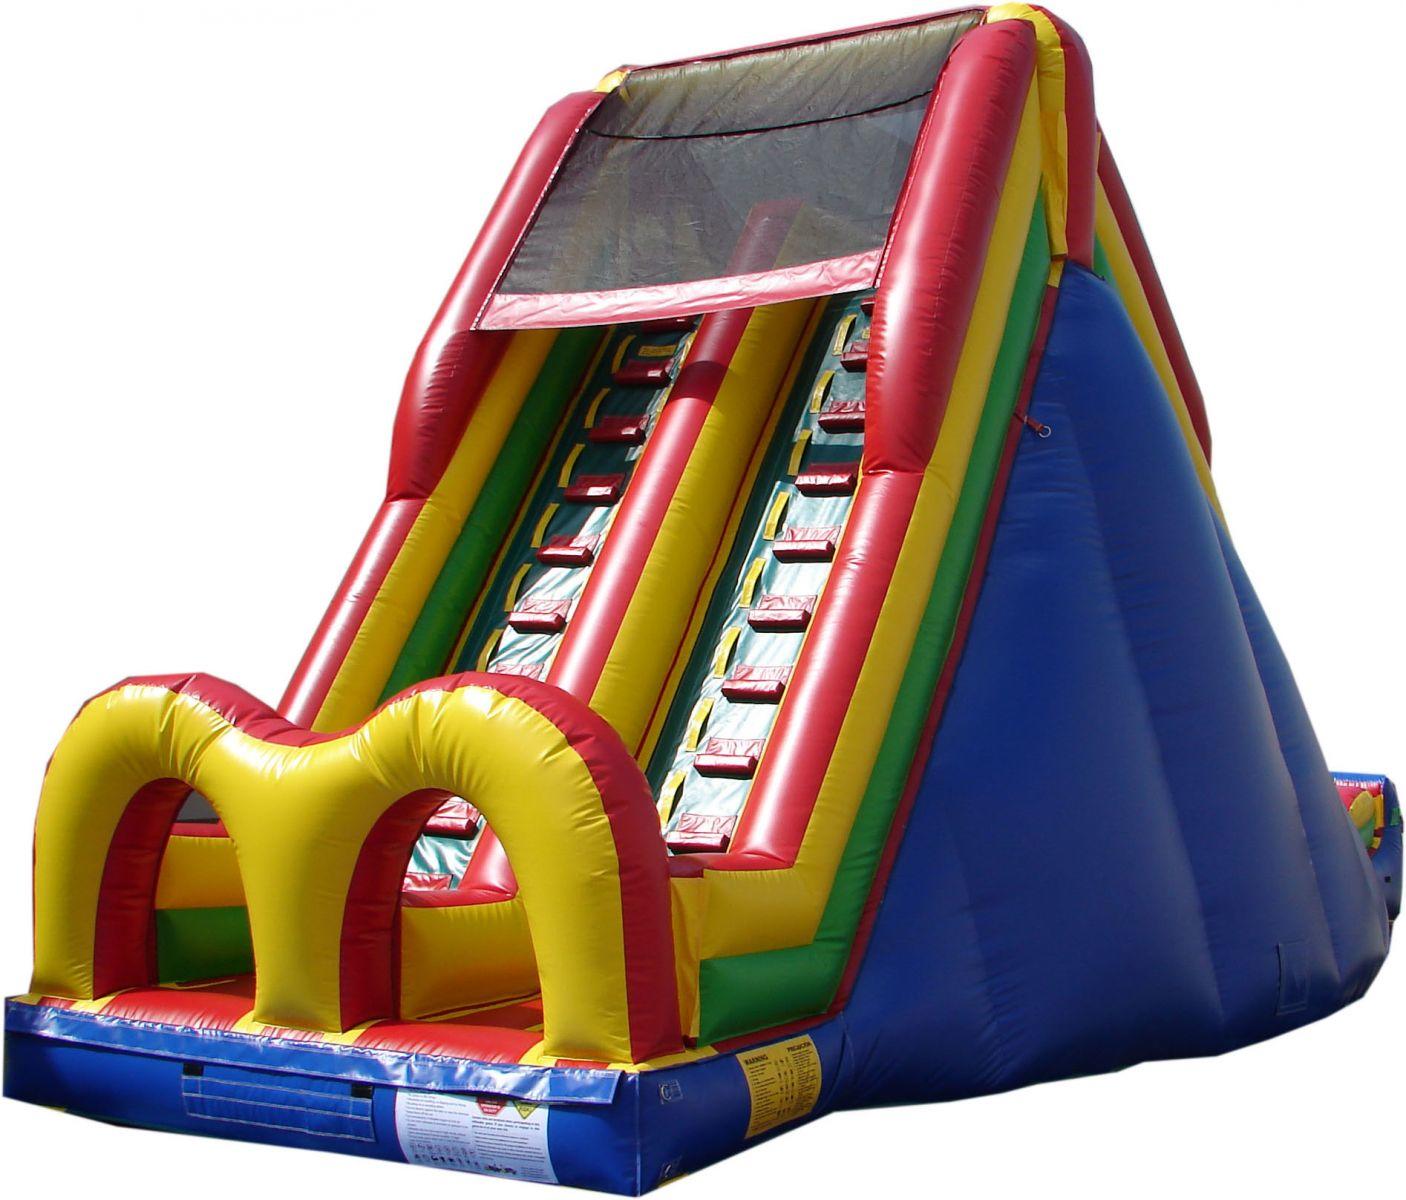 Inflatable Extreme Rush Dry Slide Rental in Chicago IL